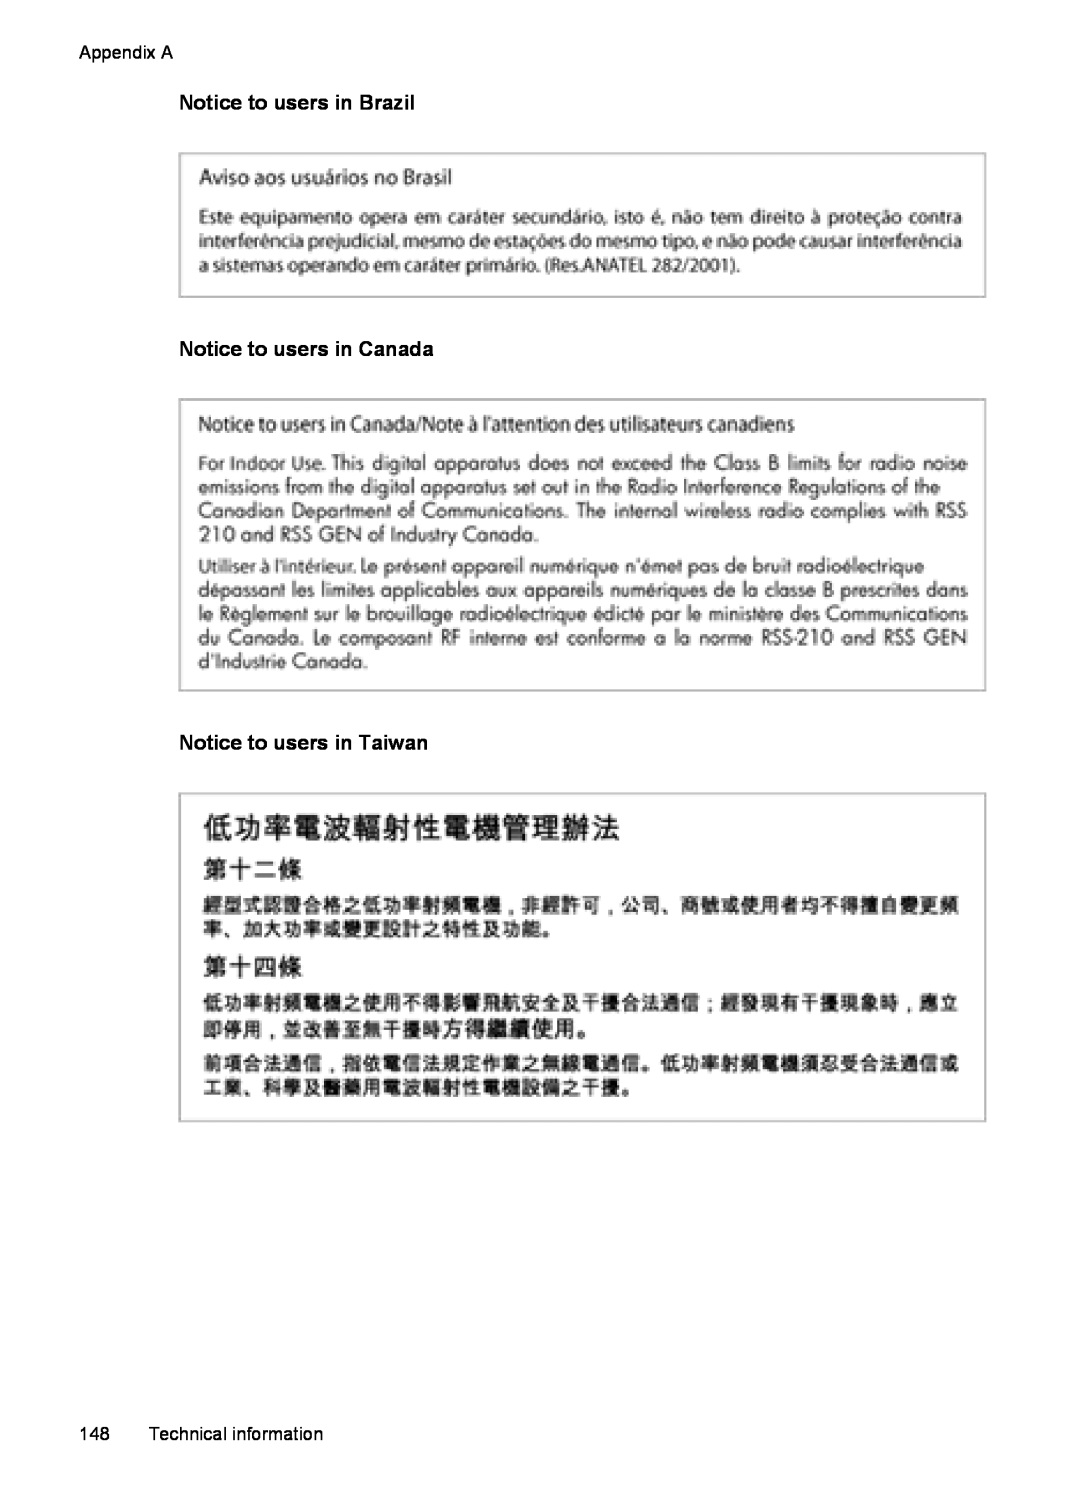 HP 6600 - H7 manual Notice to users in Brazil Notice to users in Canada, Notice to users in Taiwan, Appendix A 